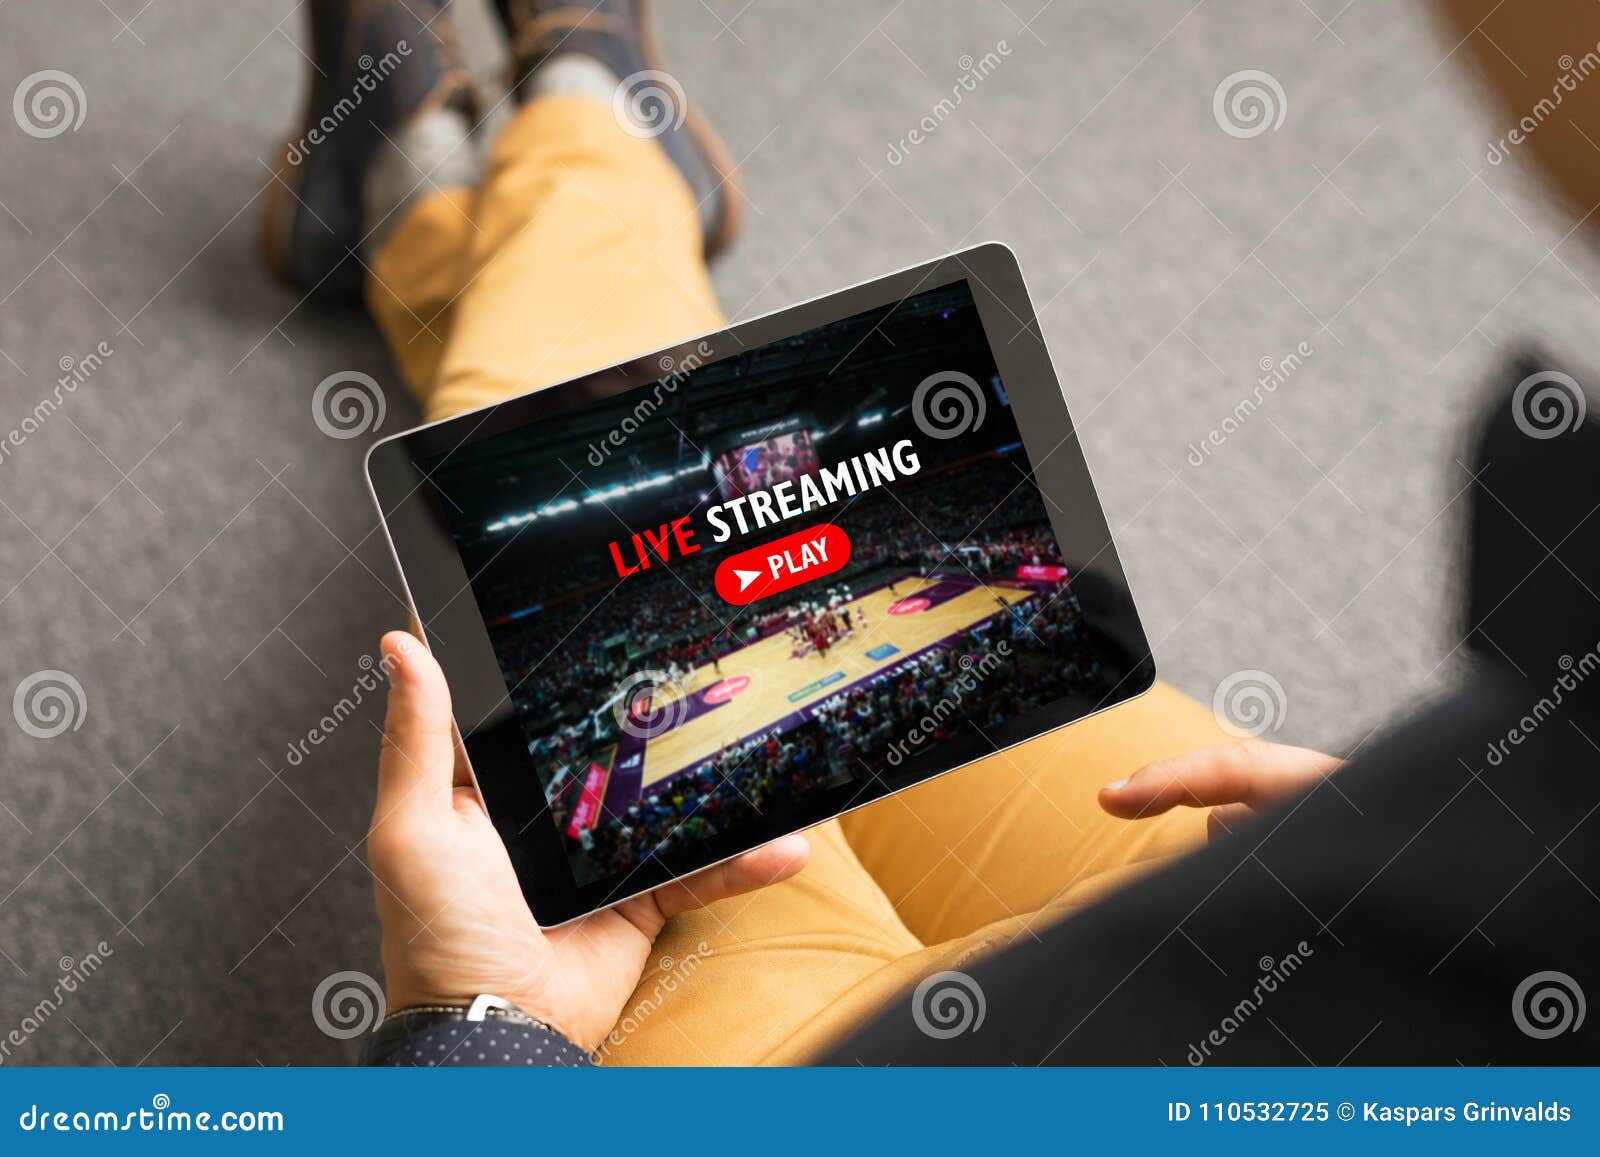 man watching sports on live streaming online service